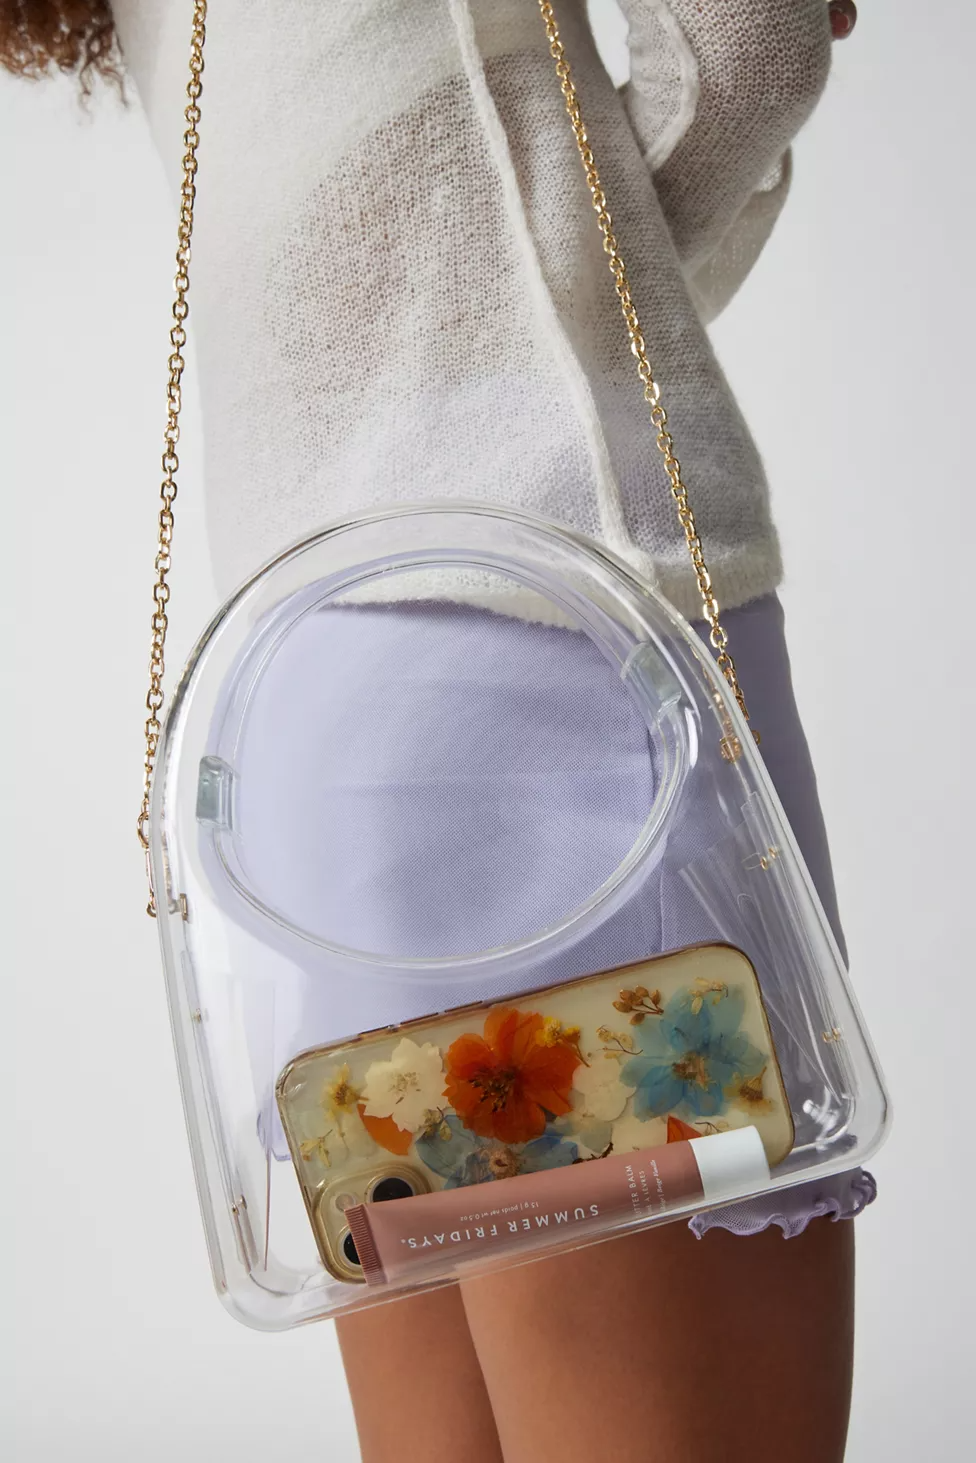 Clear Purses for Your Next Concert Or Game Day - This is our Bliss